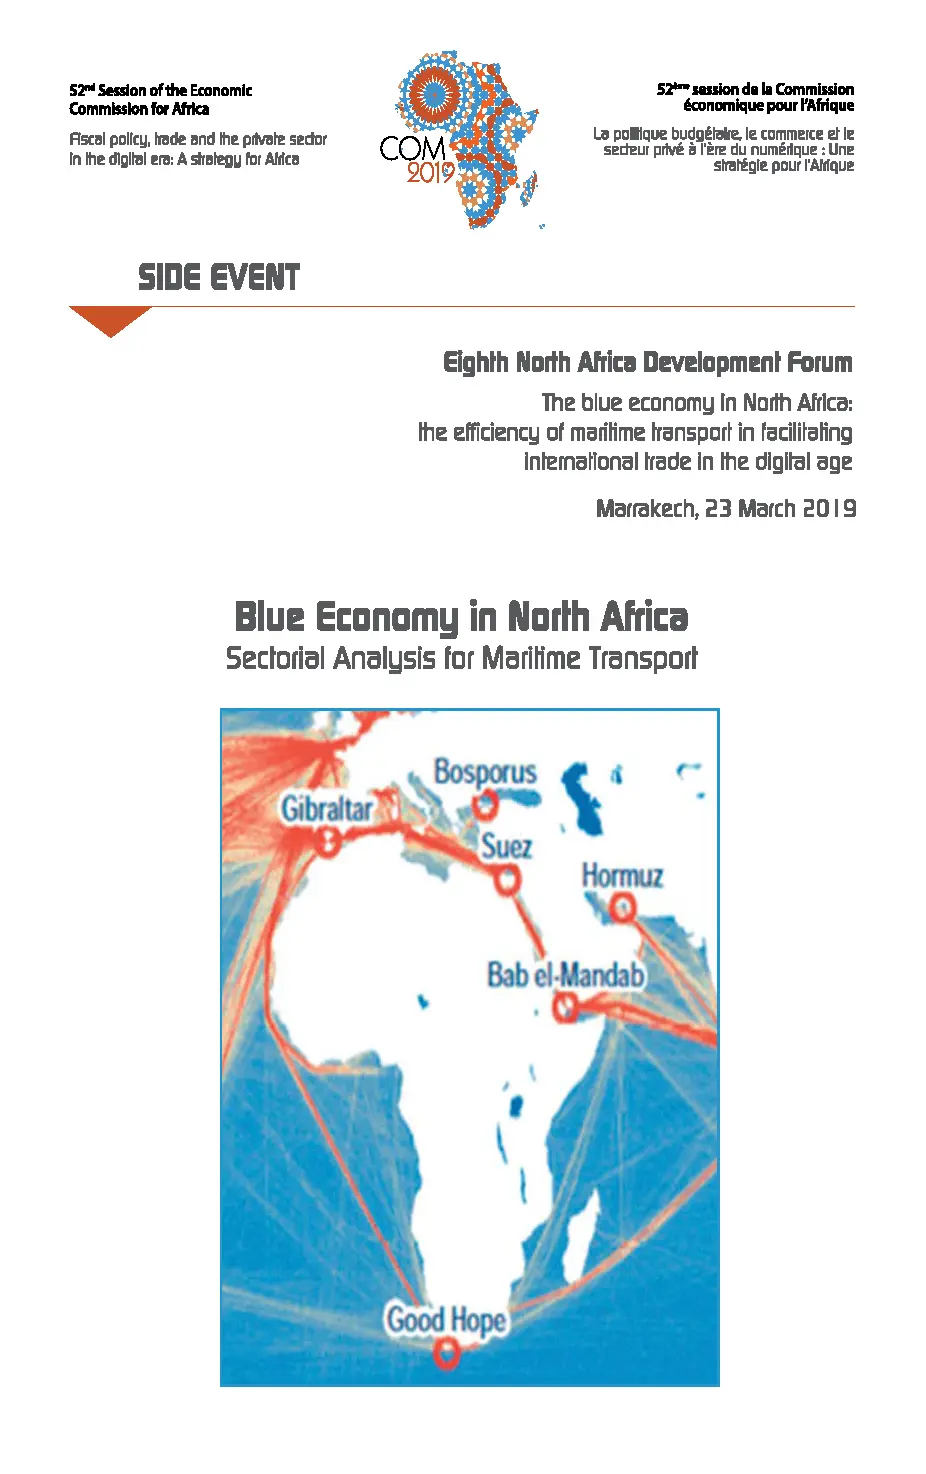 The Blue Economy in North Africa